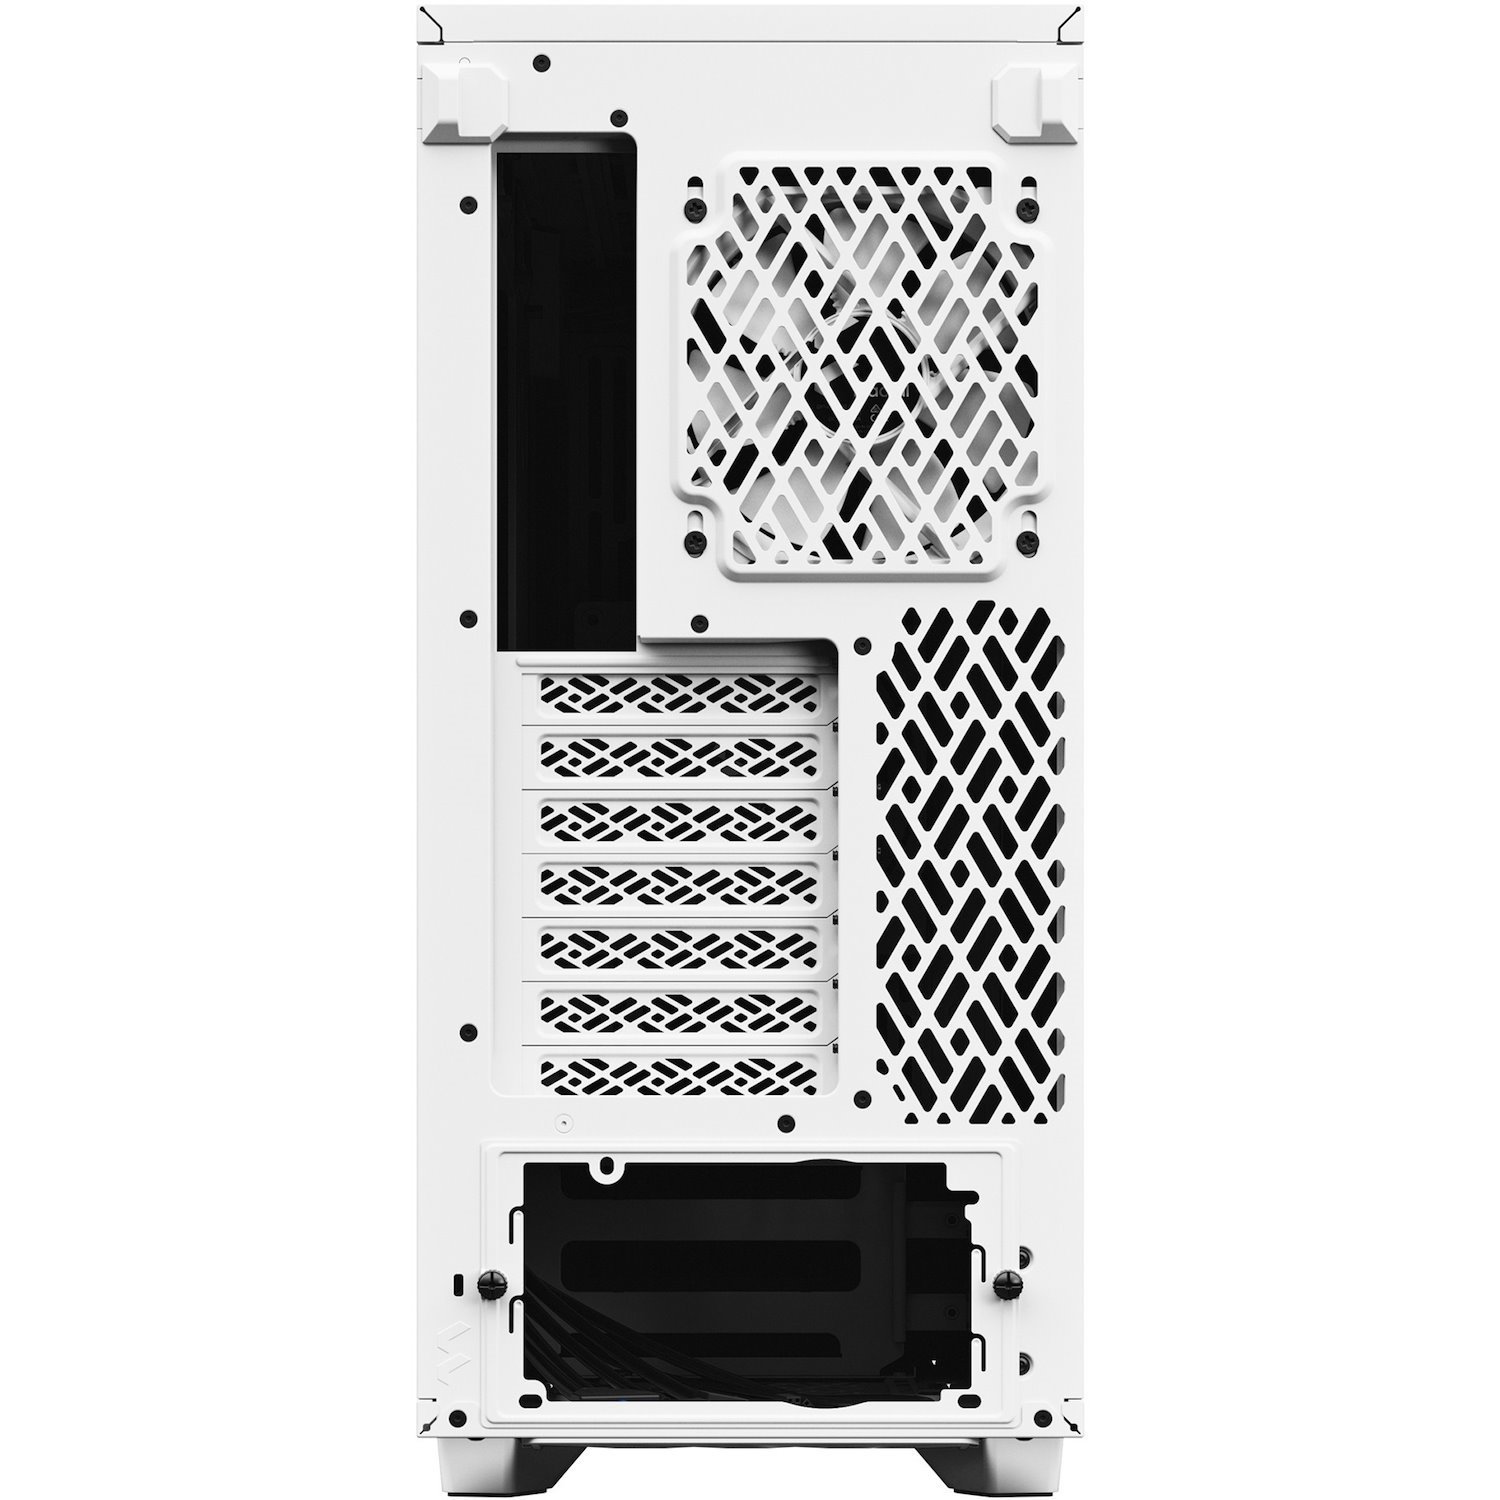 Fractal Design Define 7 Computer Case - ATX Motherboard Supported - Mid-tower - Brushed Aluminium - White